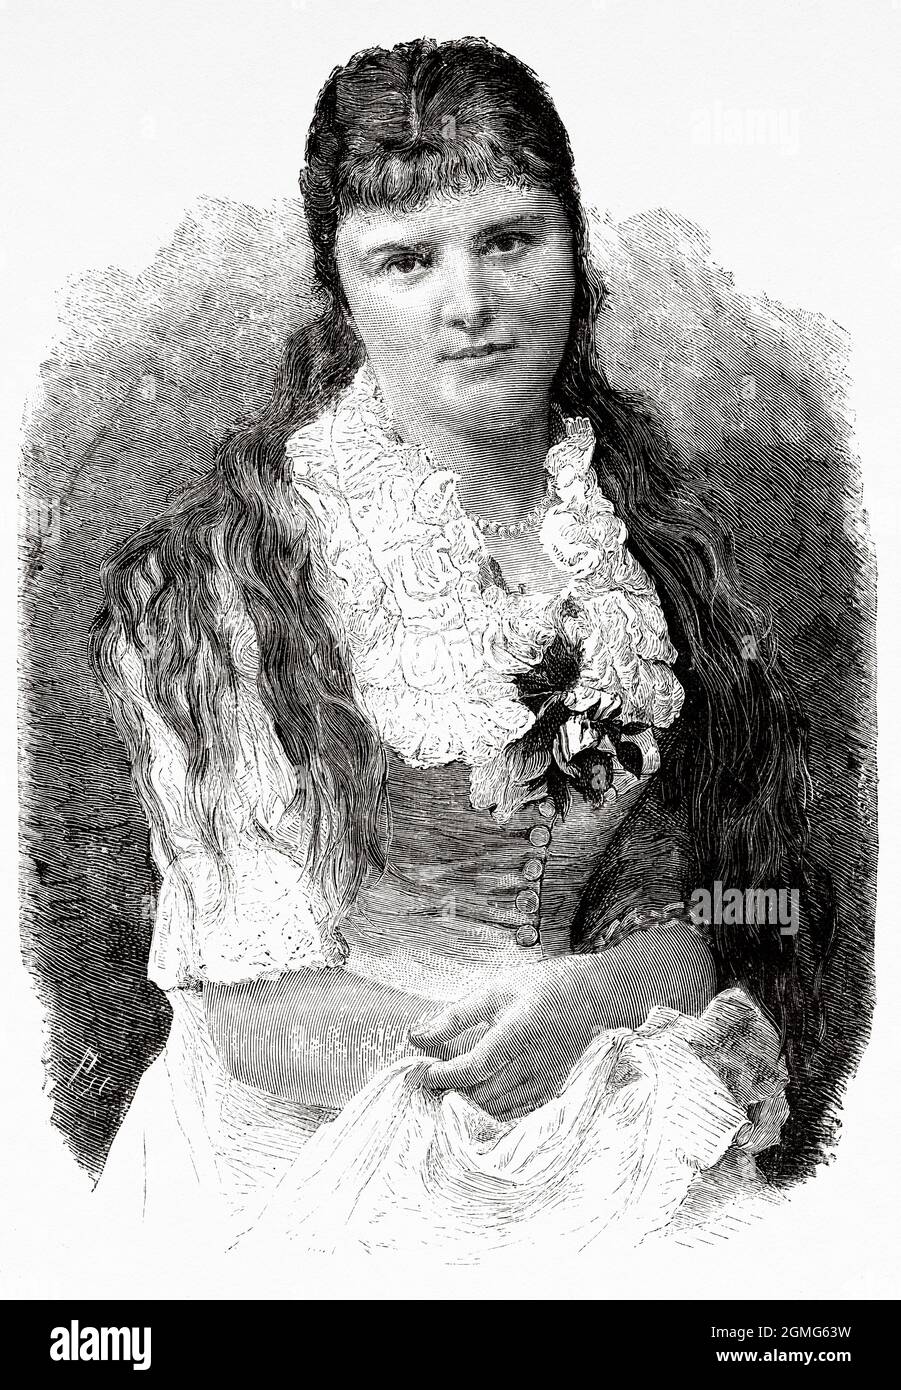 Prize for the most beautiful woman, miss Cornelia Szekely, 1st female beauty contest, held first in Spa and then in Budapest. Old 19th century engraved illustration from La Ilustración Artística 1882 Stock Photo